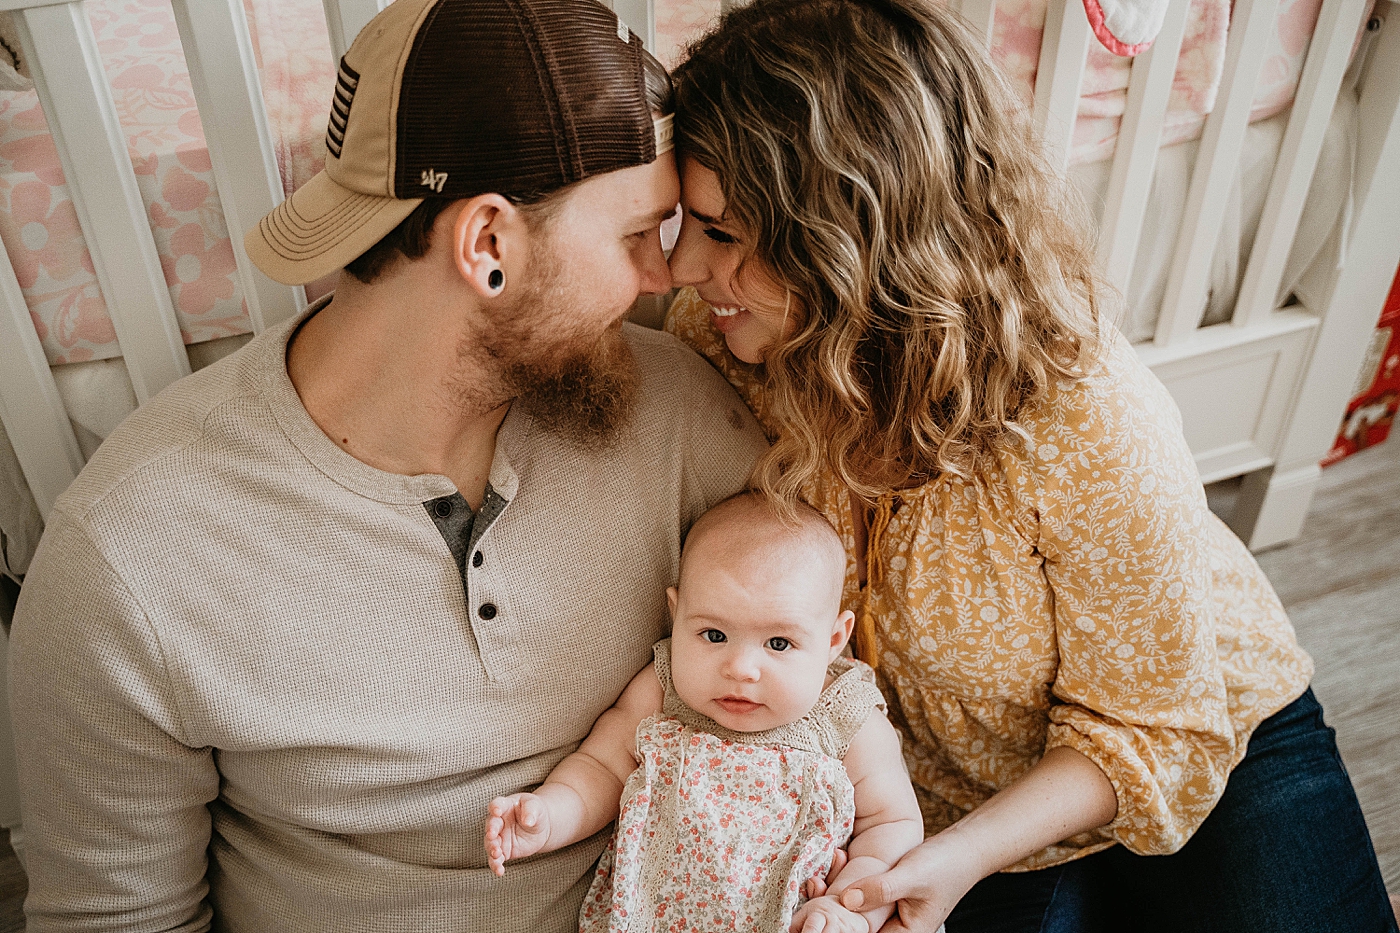 Mom and Dad touchingnoses with Baby between them At Home South Florida Family Photography captured by South Florida Family Photographer Krystal Capone Photography 